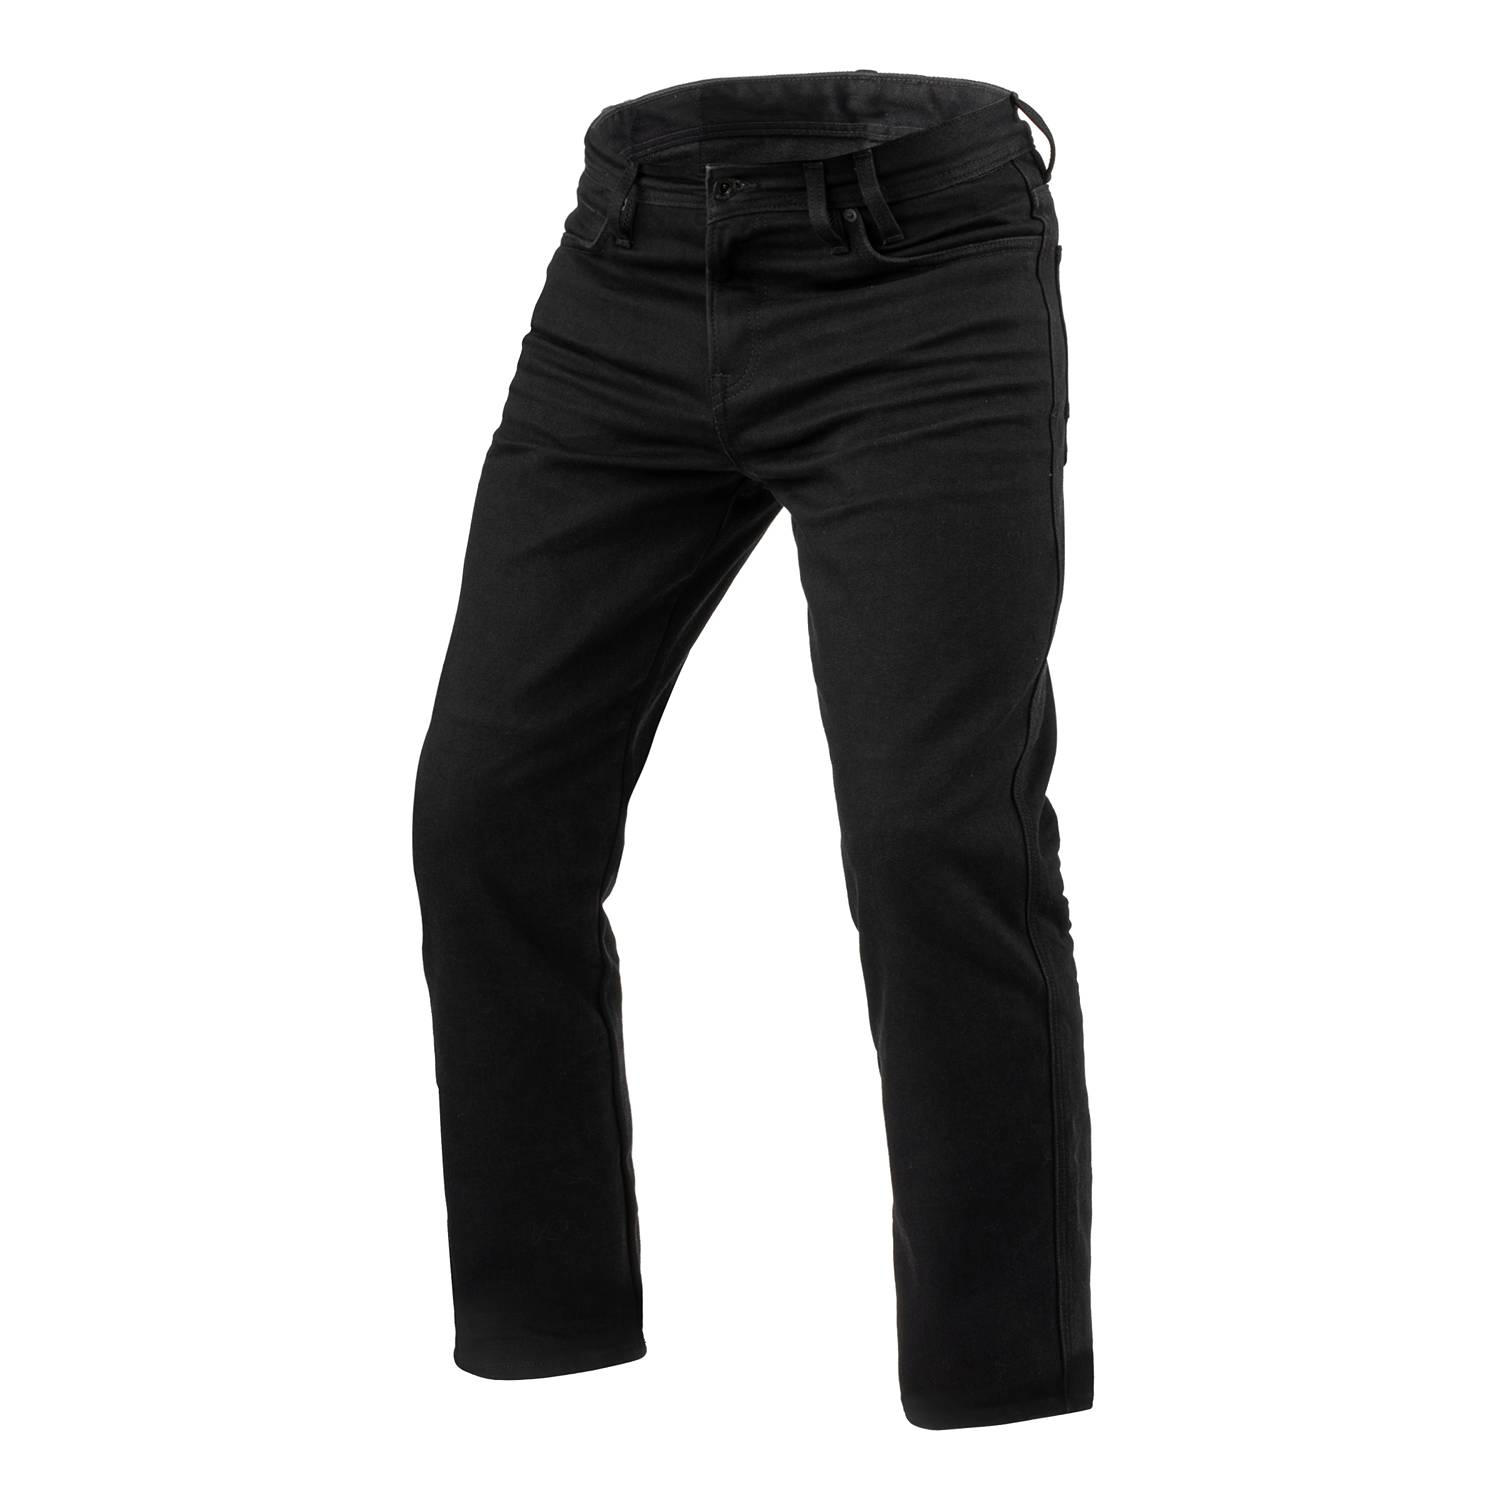 Image of REV'IT! Jeans Lombard 3 RF Black L36 Motorcycle Jeans Size L36/W30 ID 8700001375863